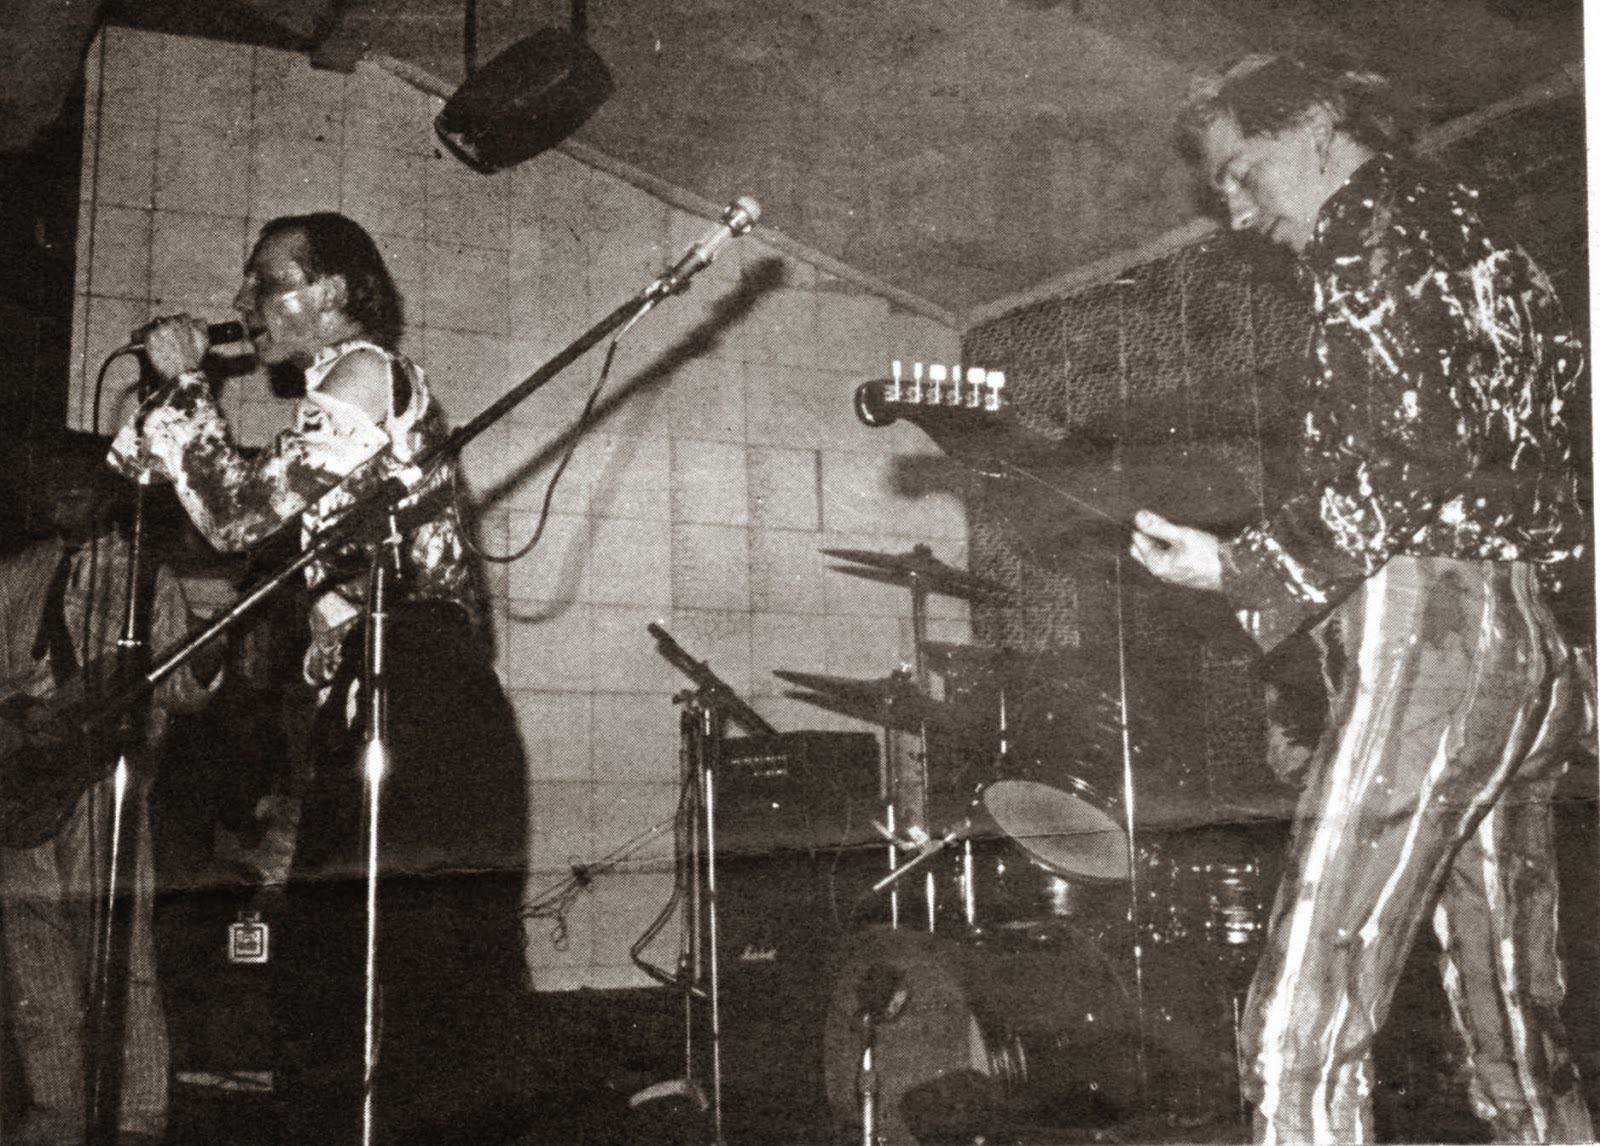 Feed the Enemy: Buzzcocks at The Electric Circus, 28 November 1976